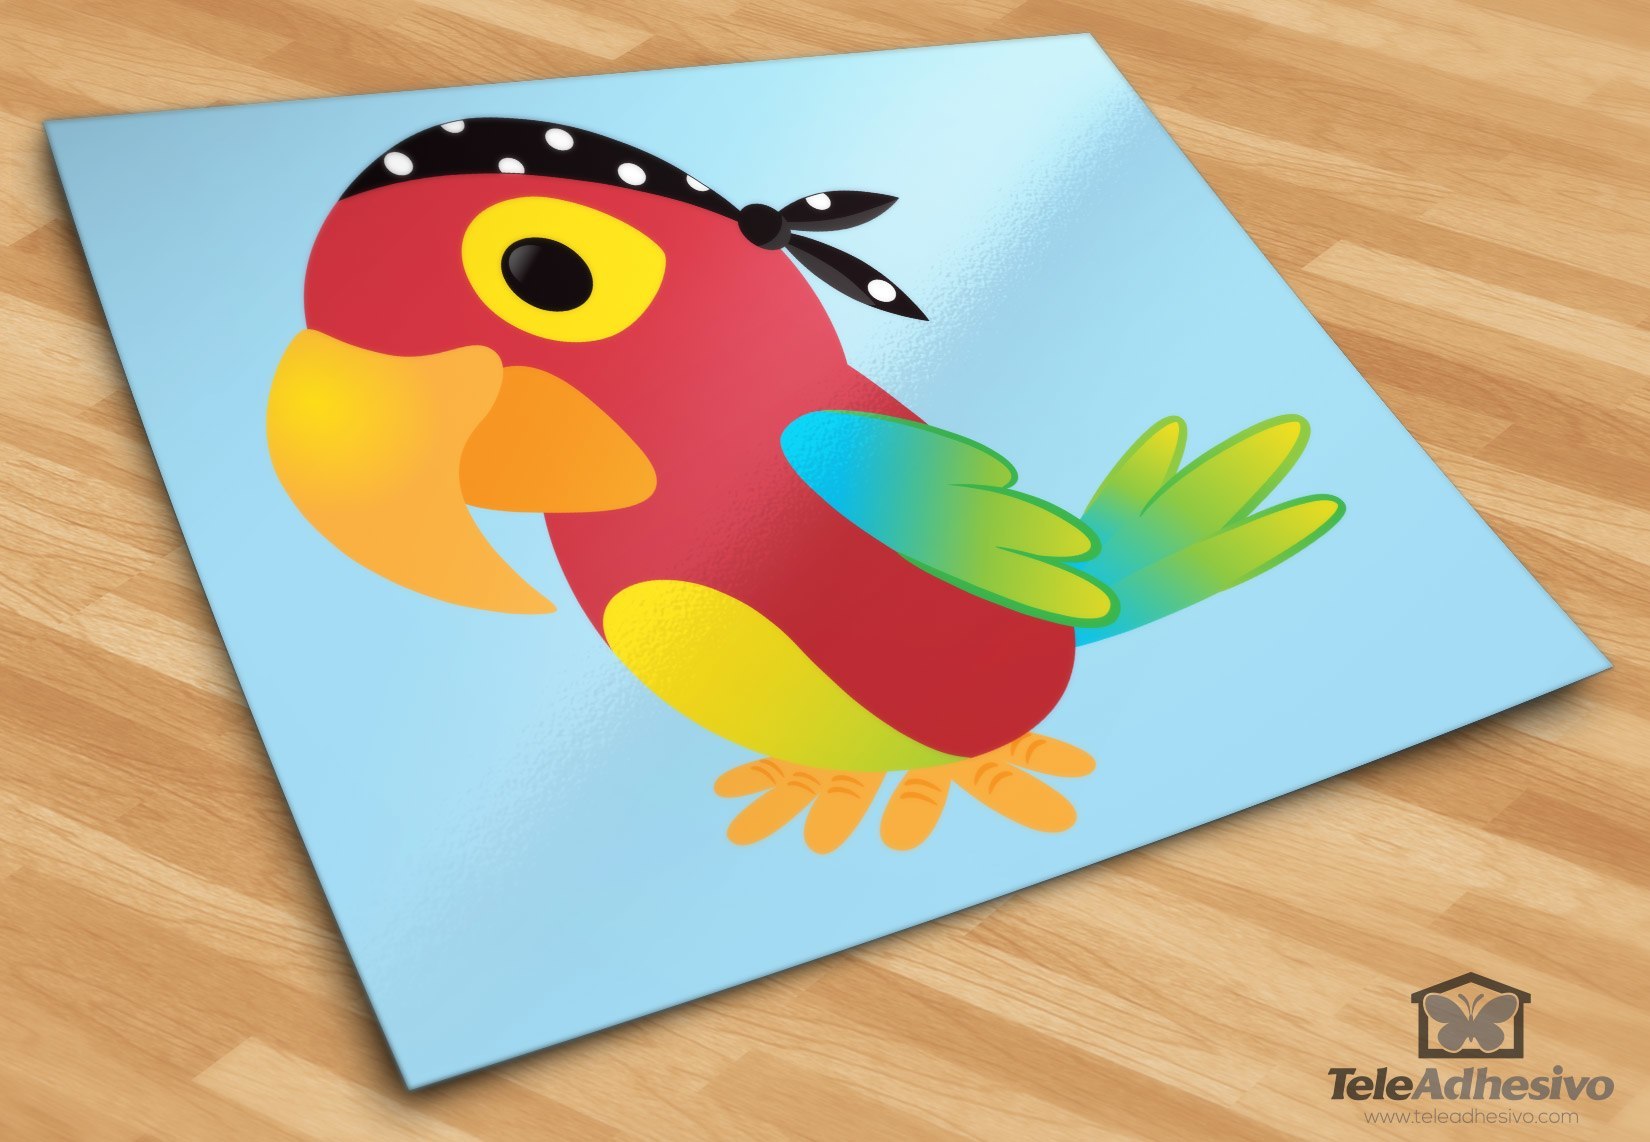 Stickers for Kids: Pirate parrot